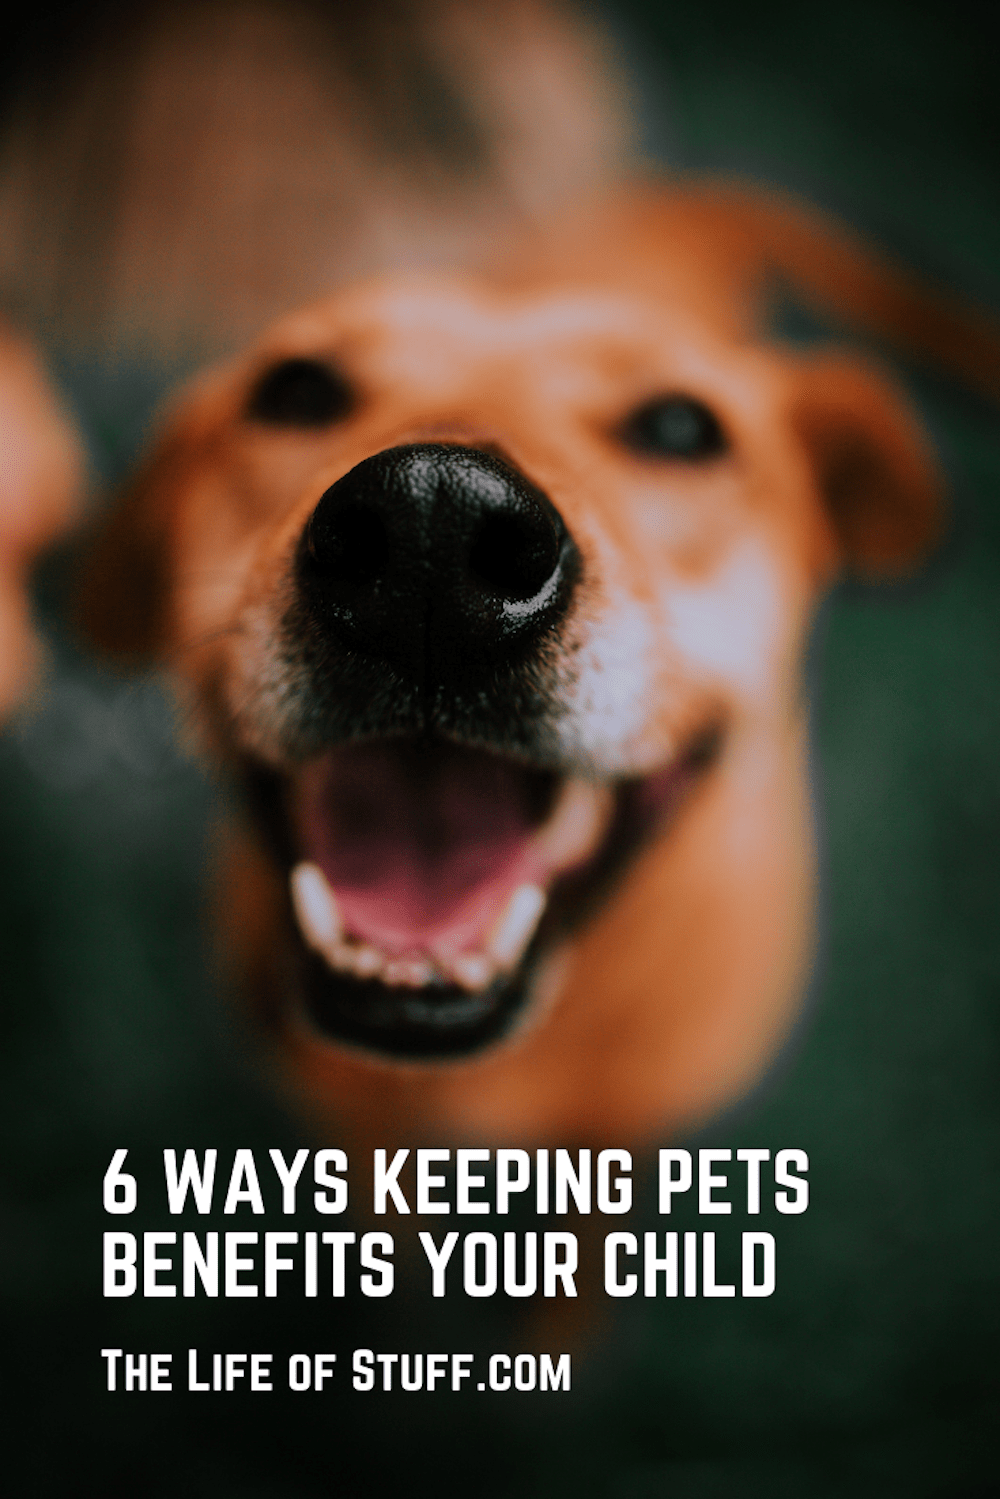 6 Ways Keeping Pets Benefits Your Child - The Life of Stuff.com